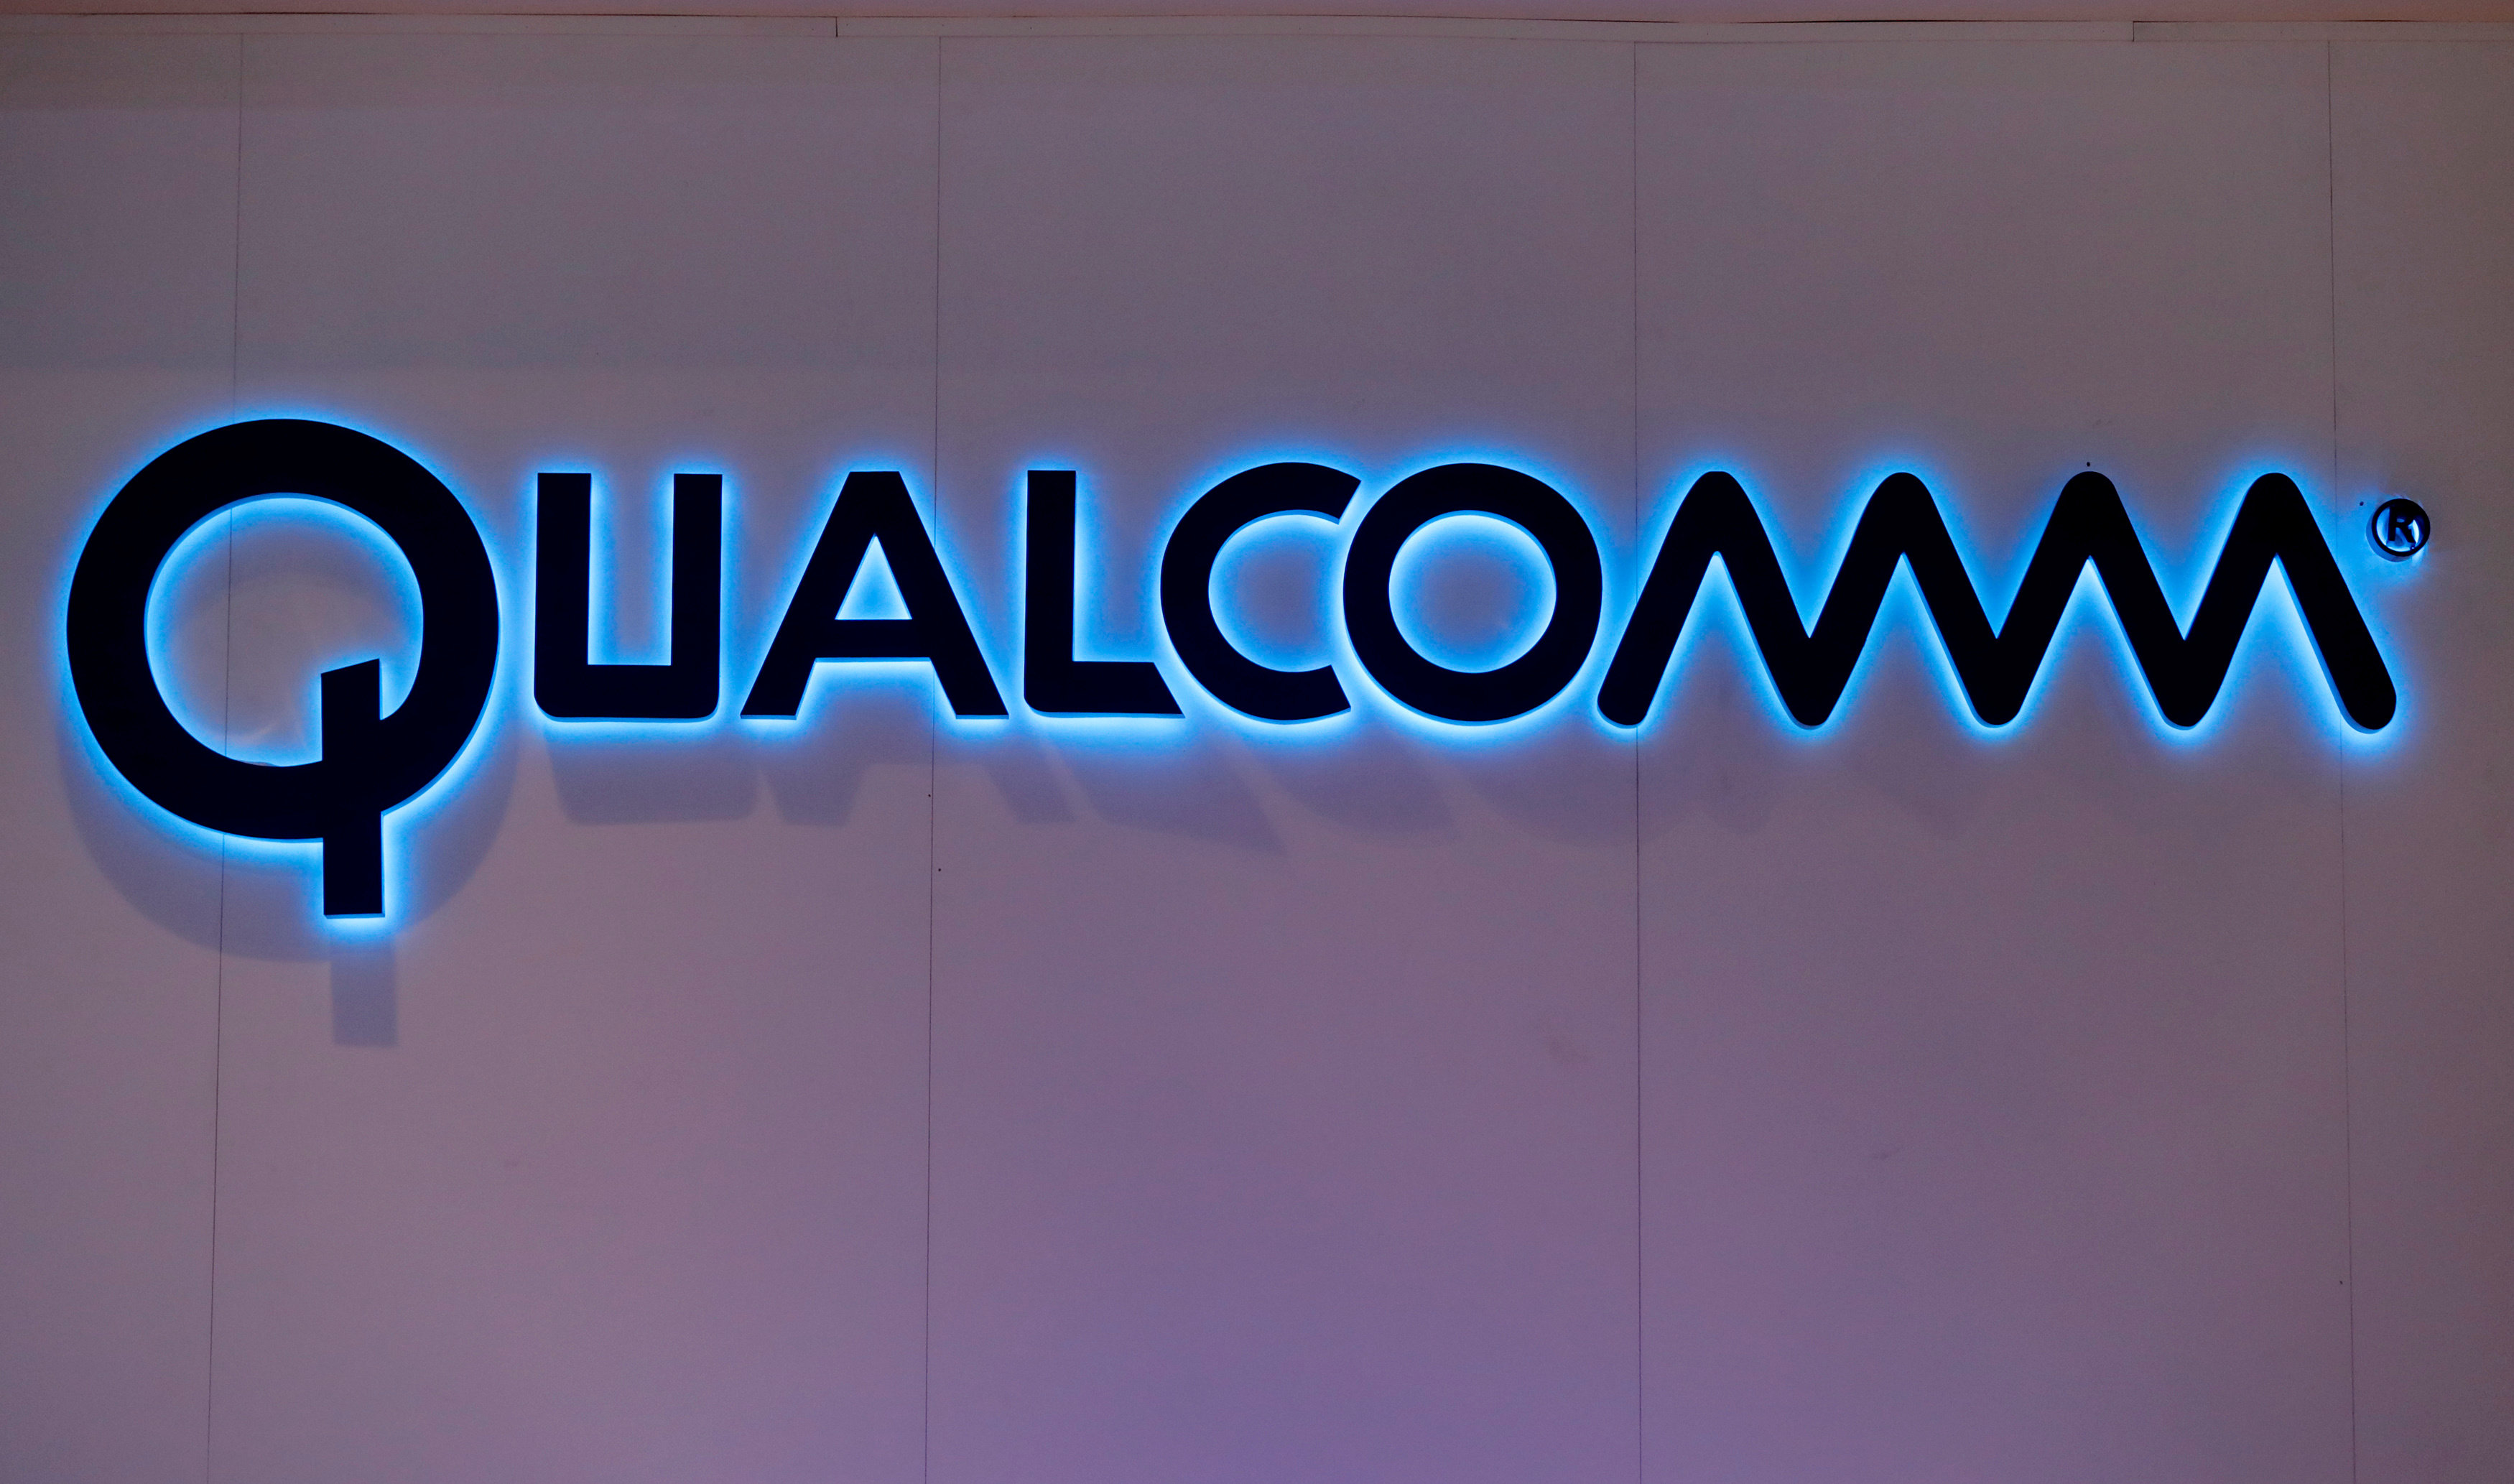 Qualcomm to meet China regulators in push to clear NXP deal